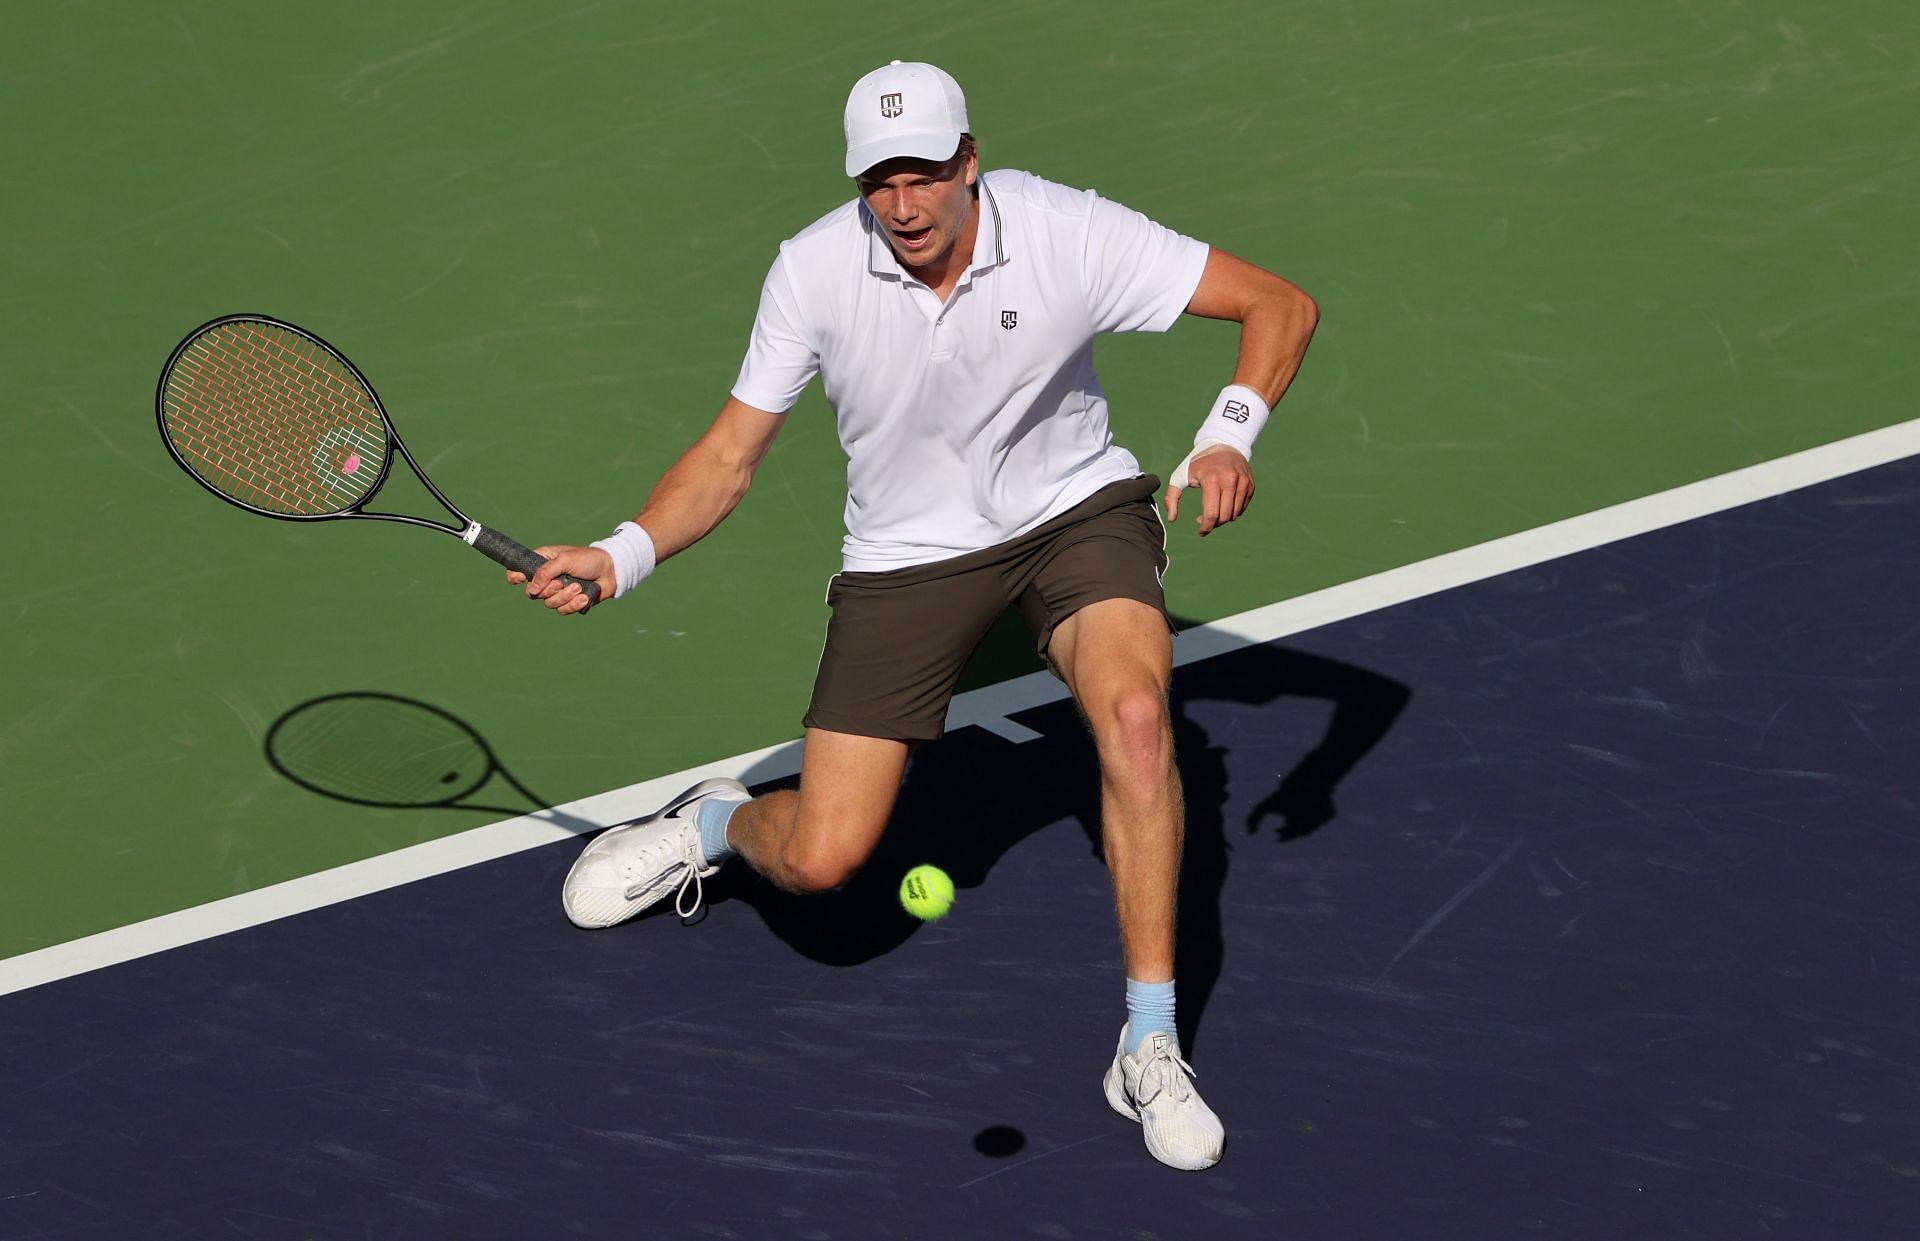 Jenson Brooksby in action at the Indian Wells Masters last year